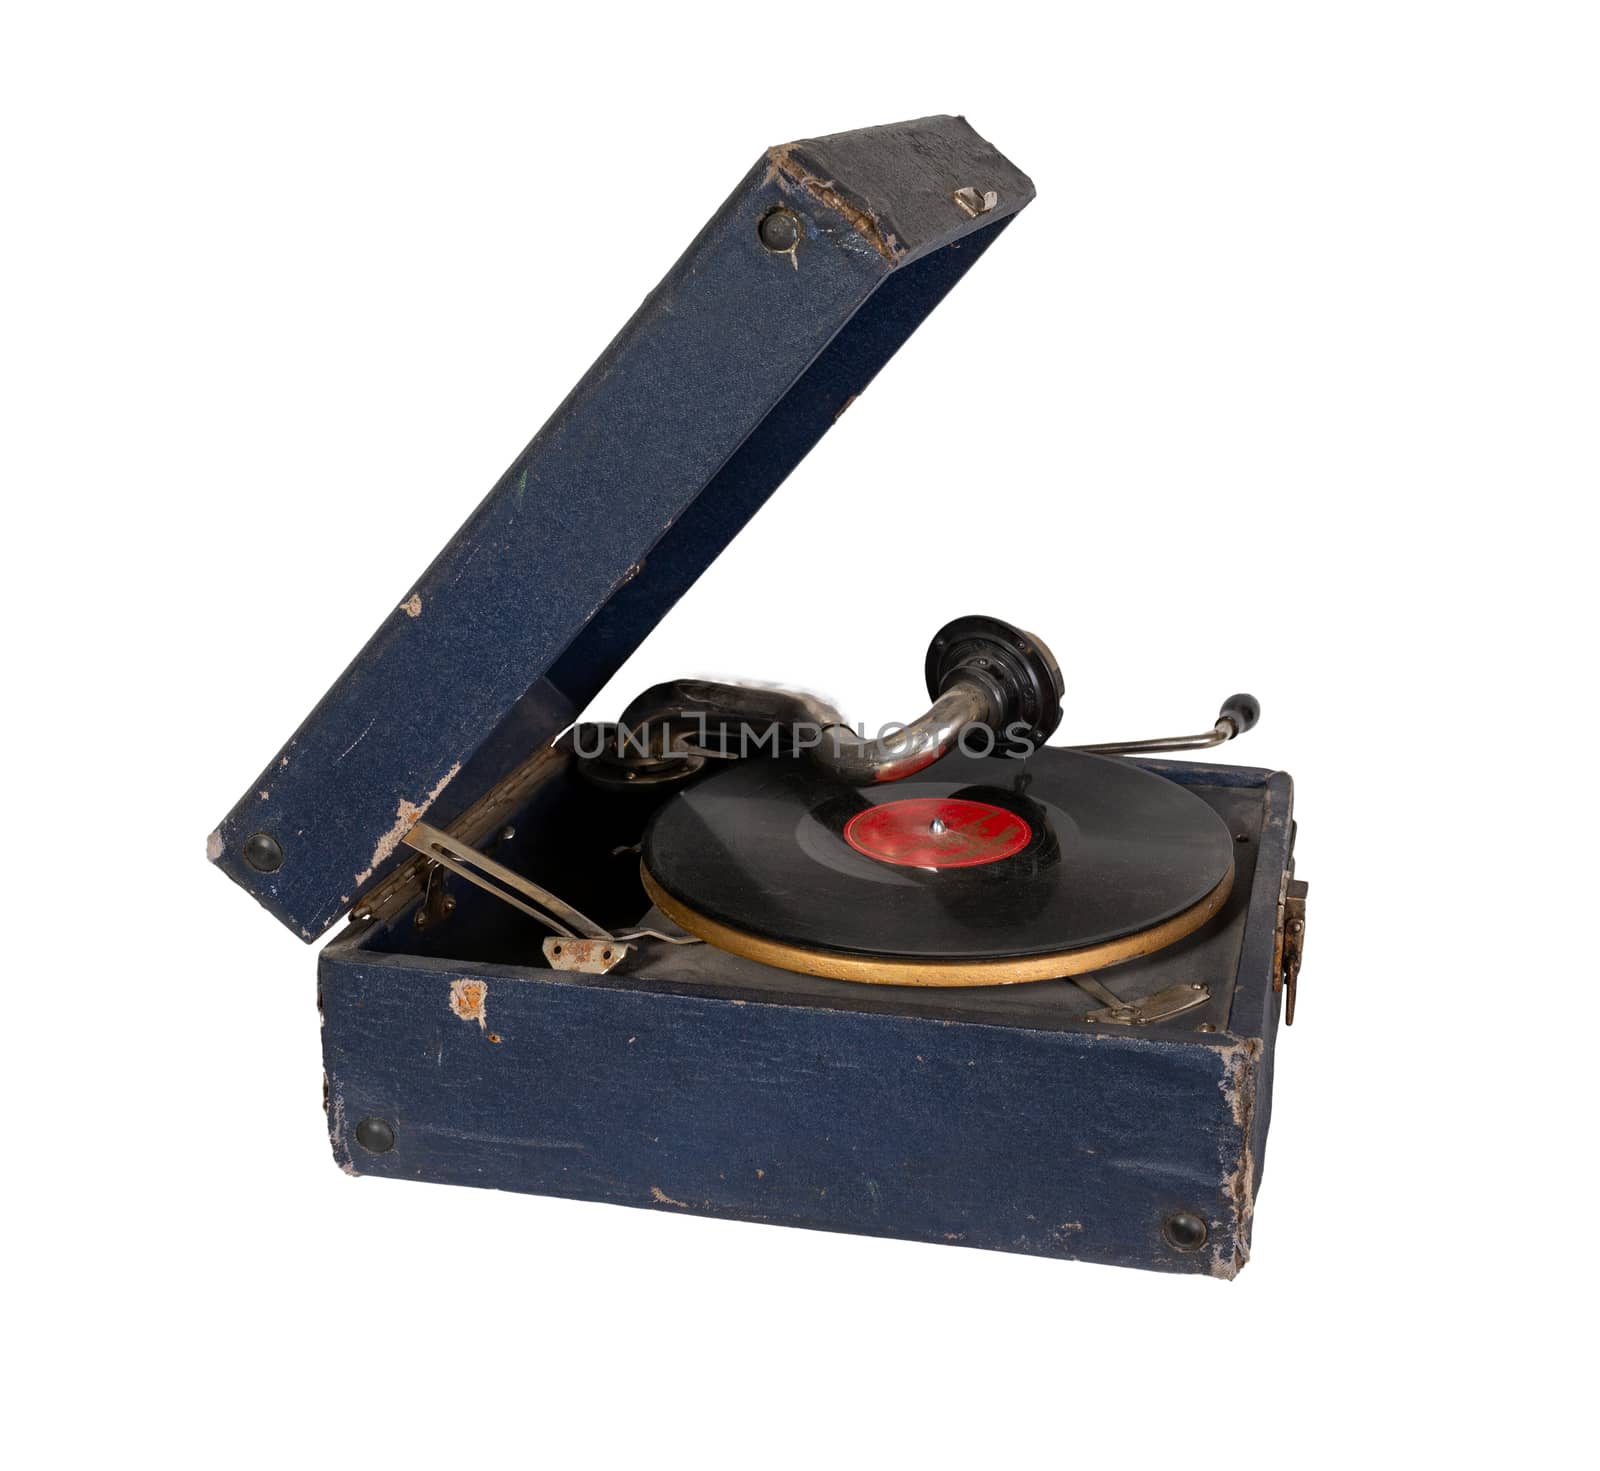 Portable wind-up gramophone. Phonograph with crank. Old gramophone with a plate record Isolated on a white background.